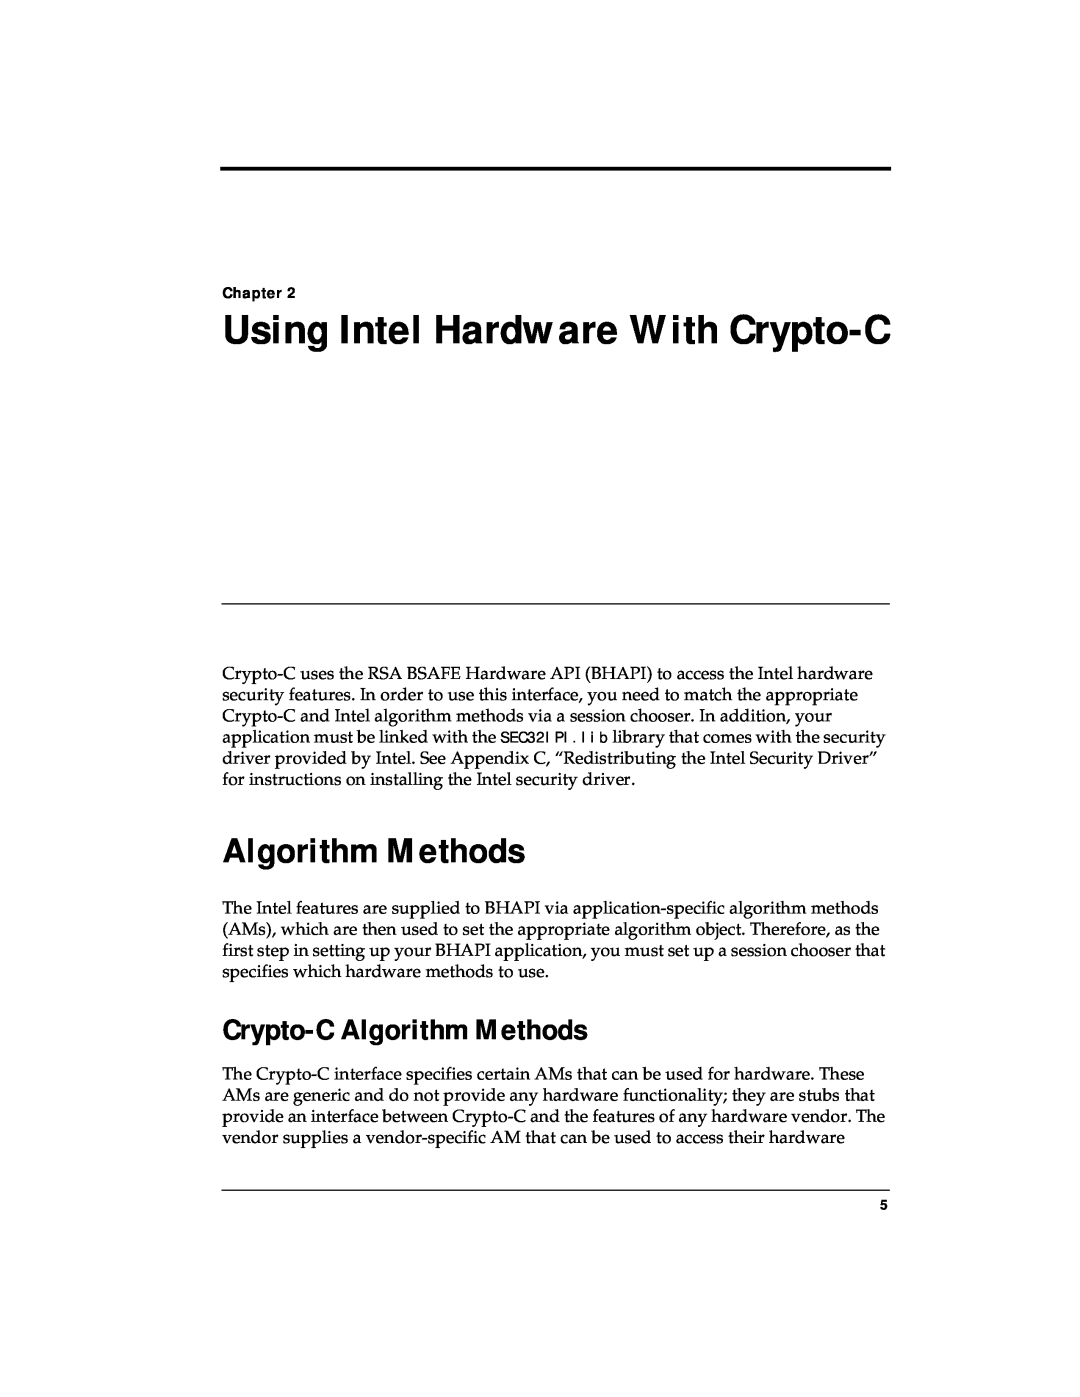 RSA Security 4.3 manual Crypto-CAlgorithm Methods, Using Intel Hardware With Crypto-C, Chapter 